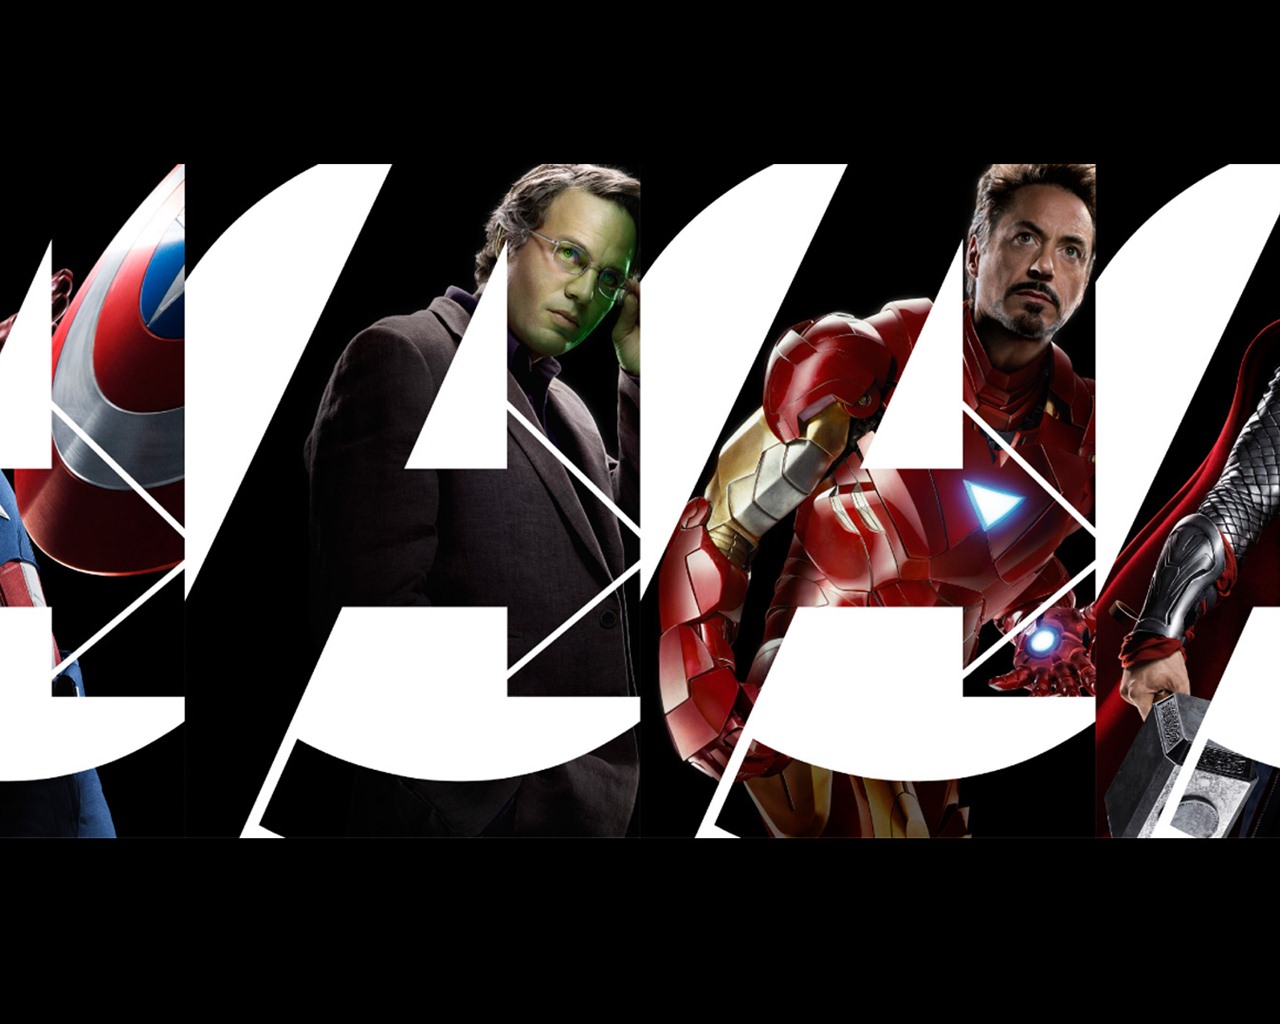 The Avengers 2012 HD wallpapers #9 - 1280x1024